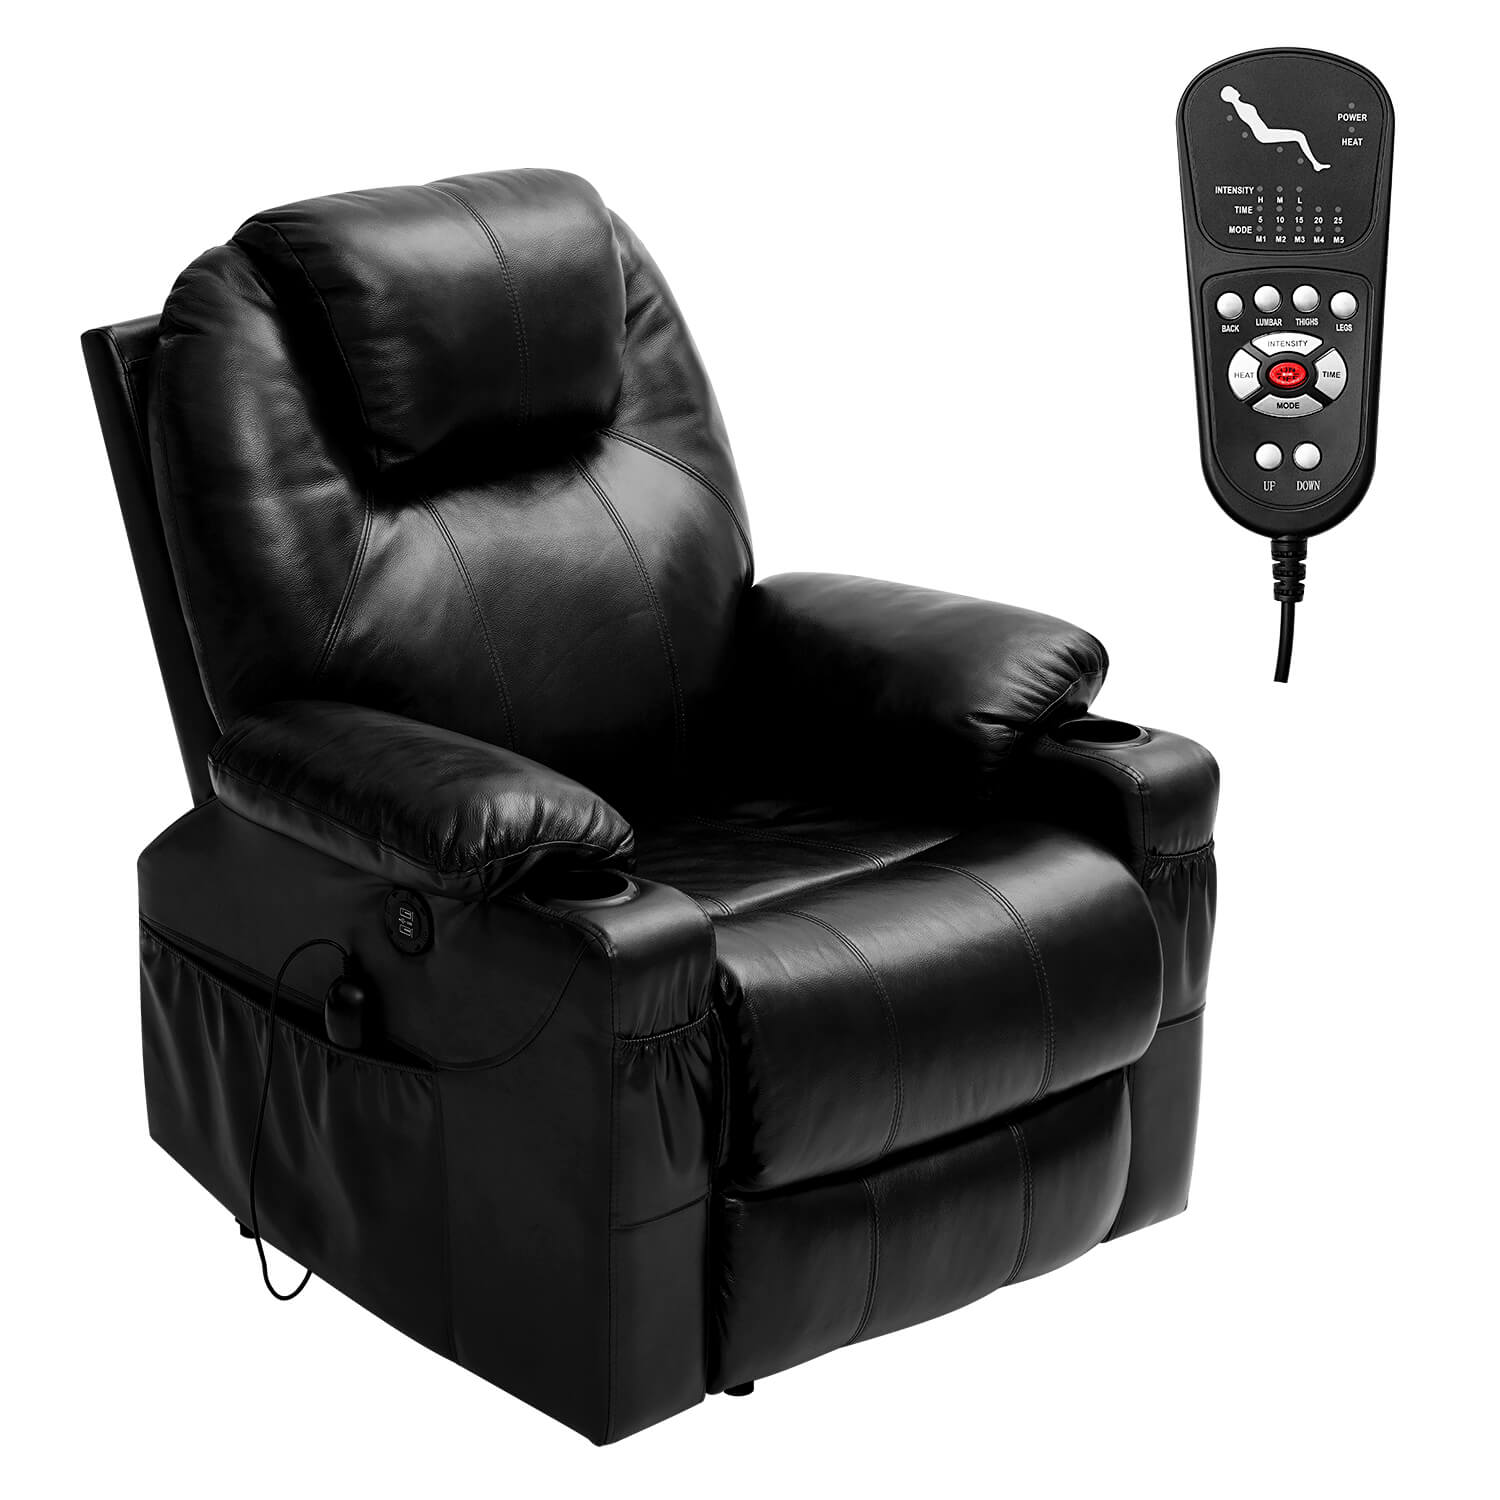 Large Genuine Leather Power Lift Chair Electric Recliner for Elderly black